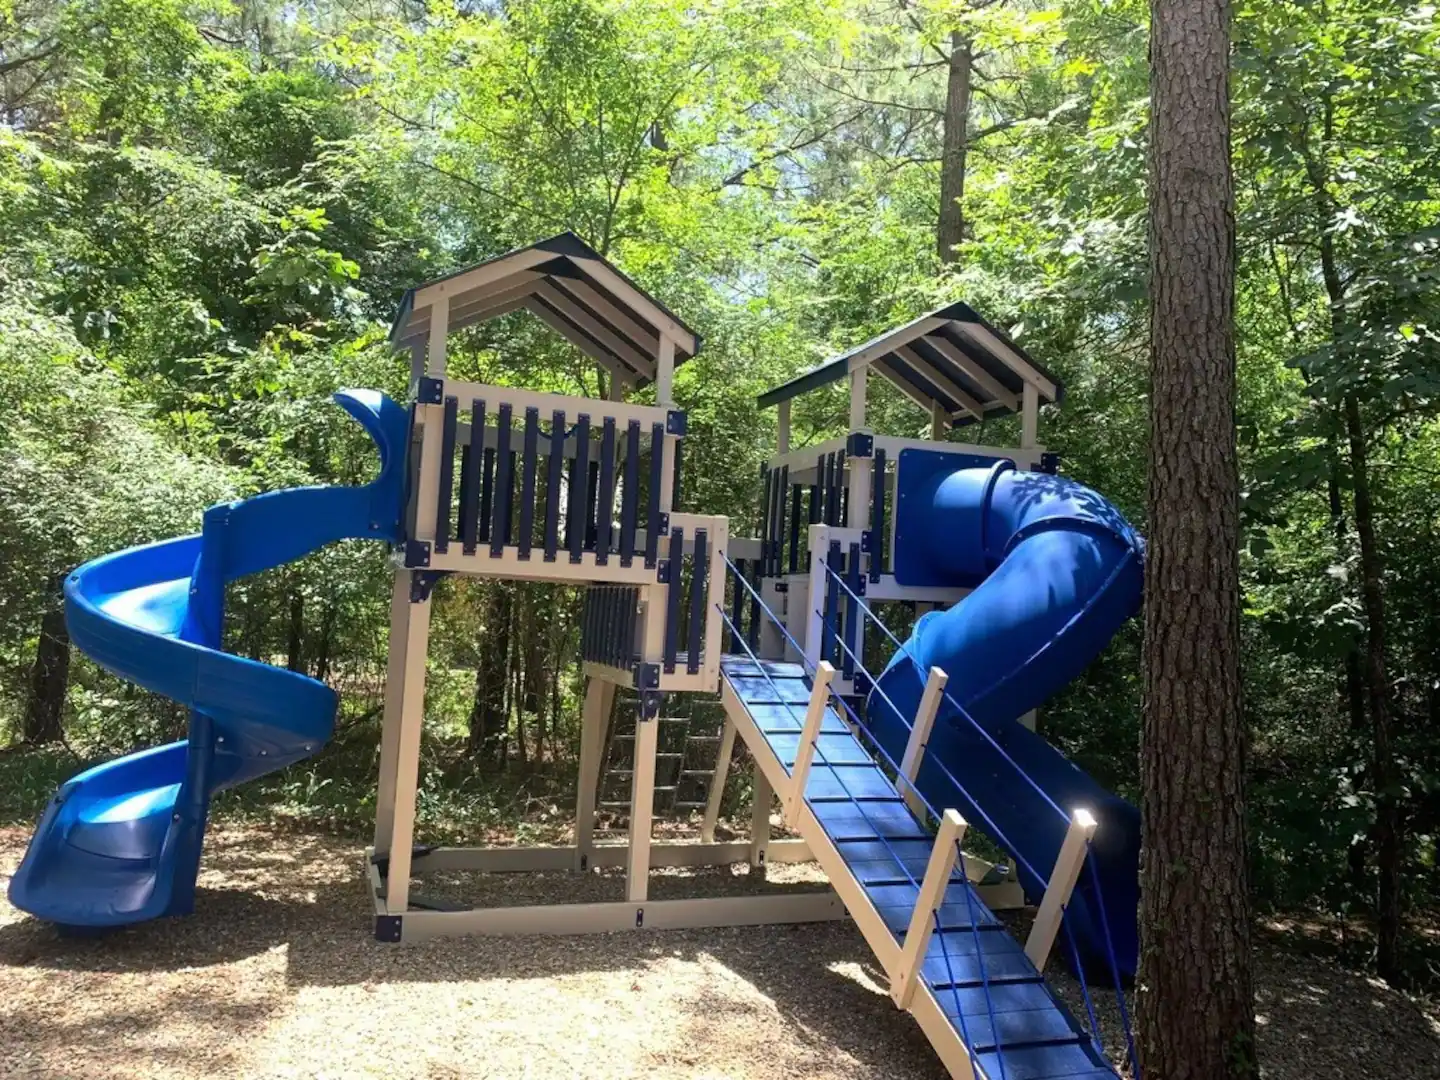 The large custom playset is nestled under the trees, providing excellent shade. 